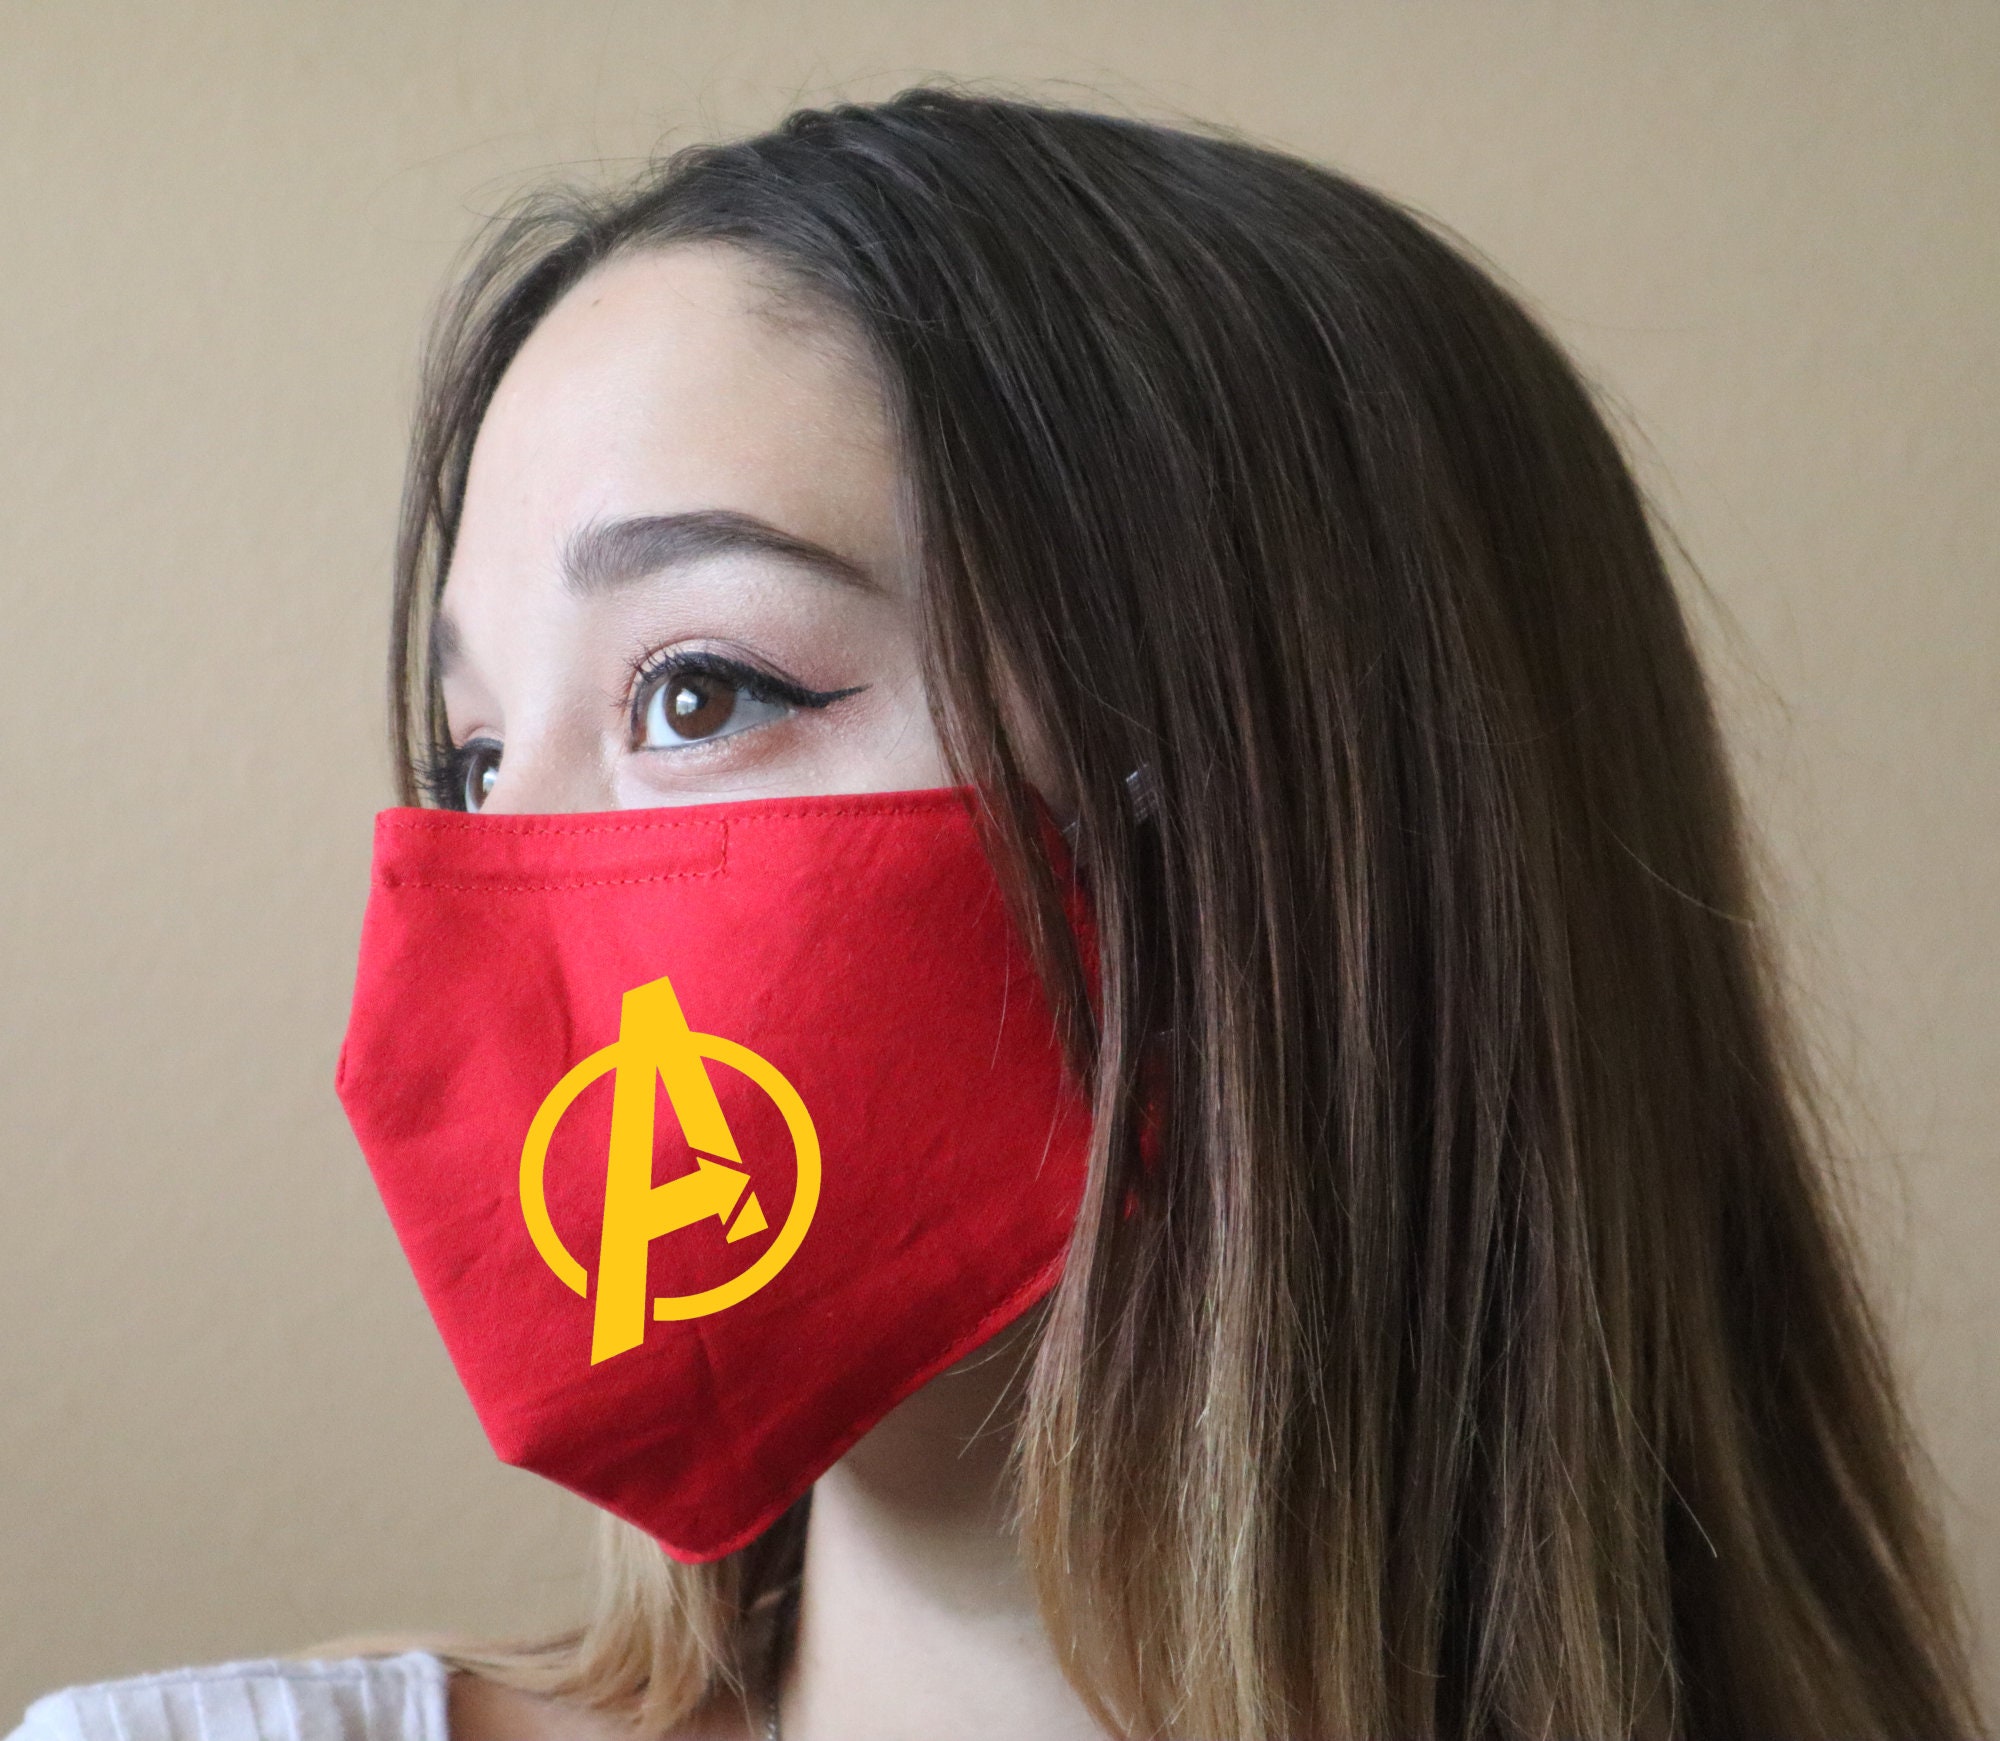 Handmade Cotton Blend Customizable Face Masks With Adjustable Ear-Loops - Super Heroes Avengers Adult Small 8 X 5"